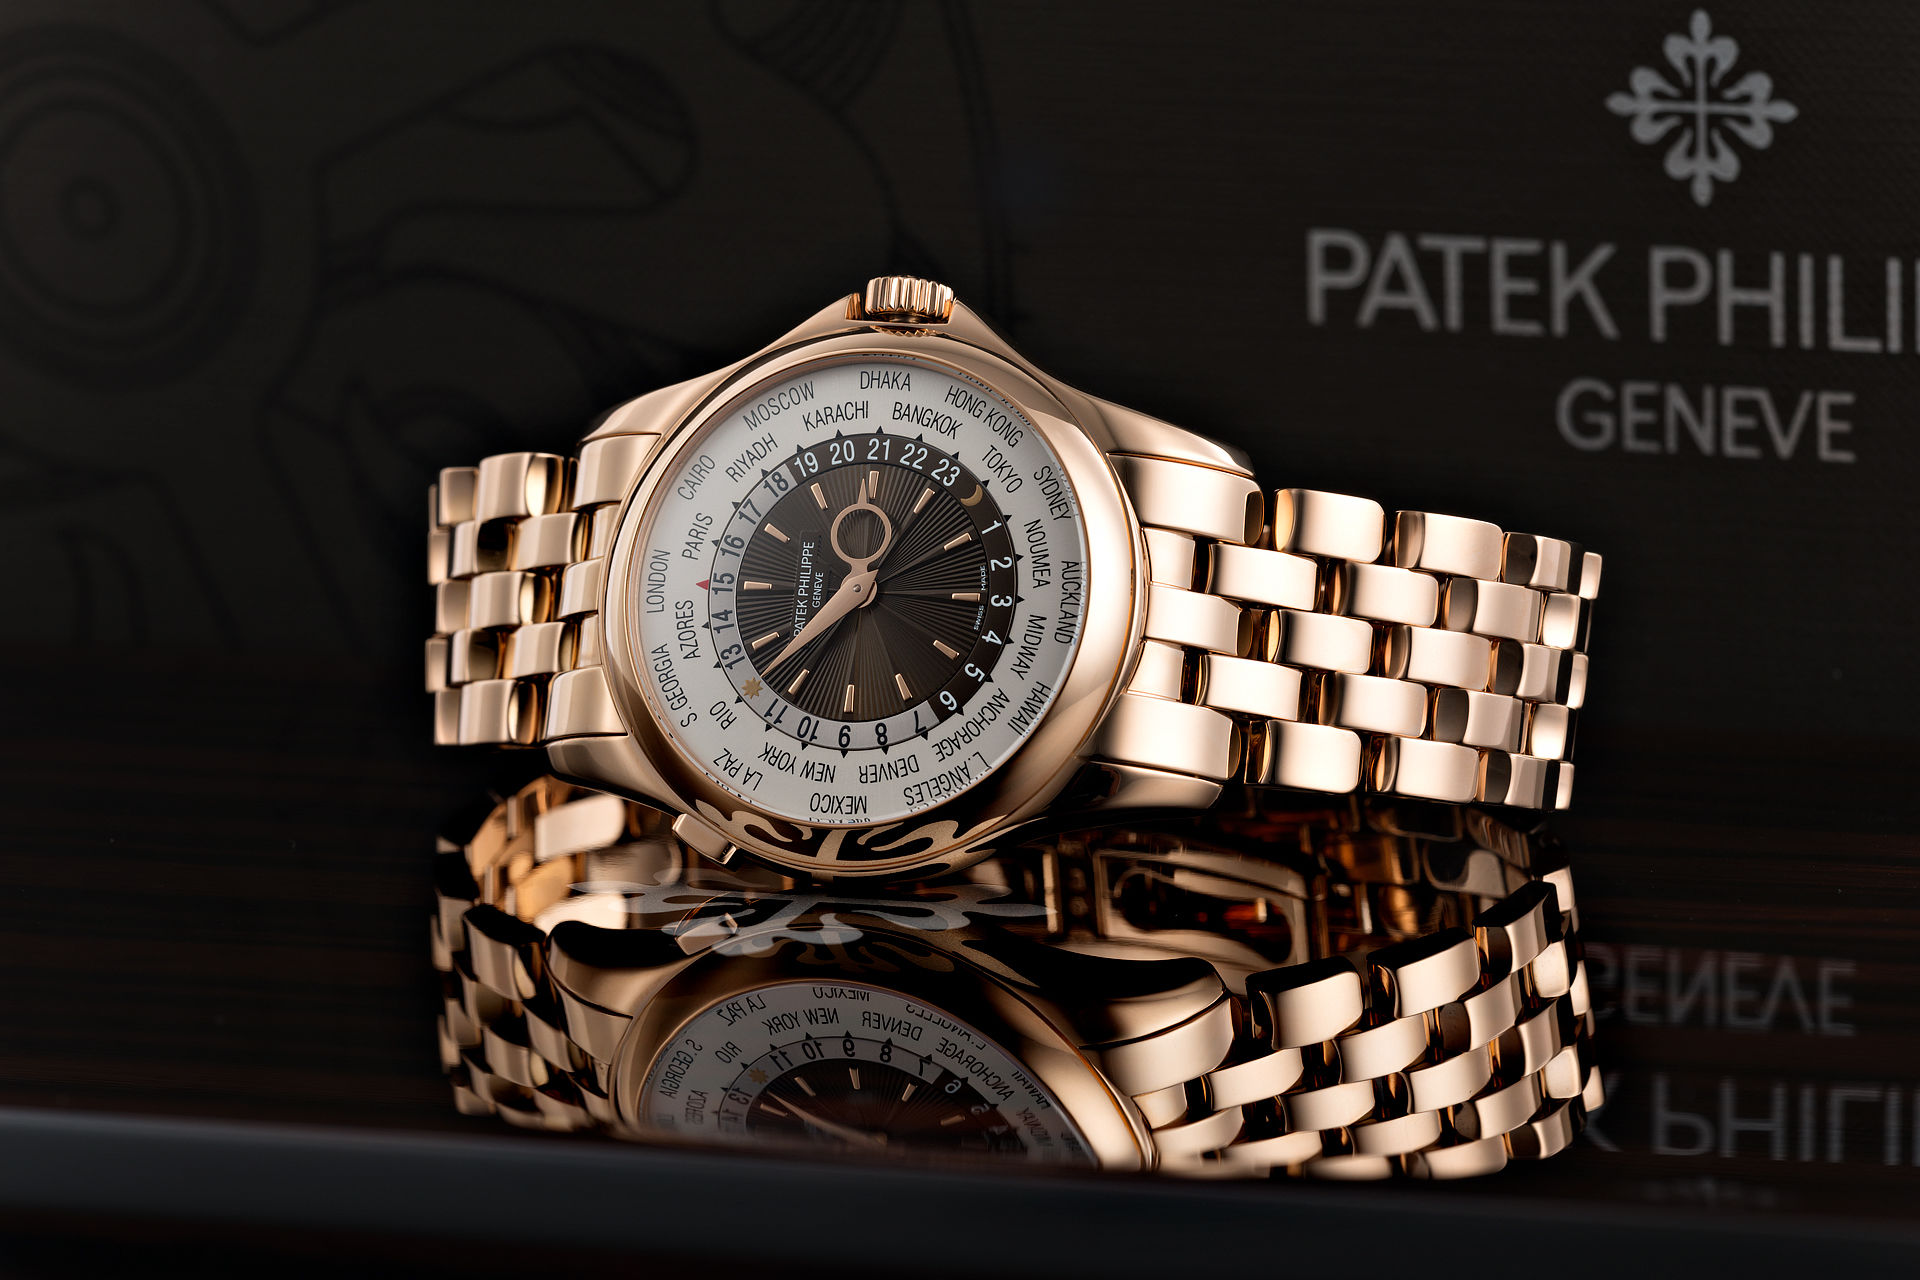 ref 5130R | 'Full Set' Immaculate | Patek Philippe World Time